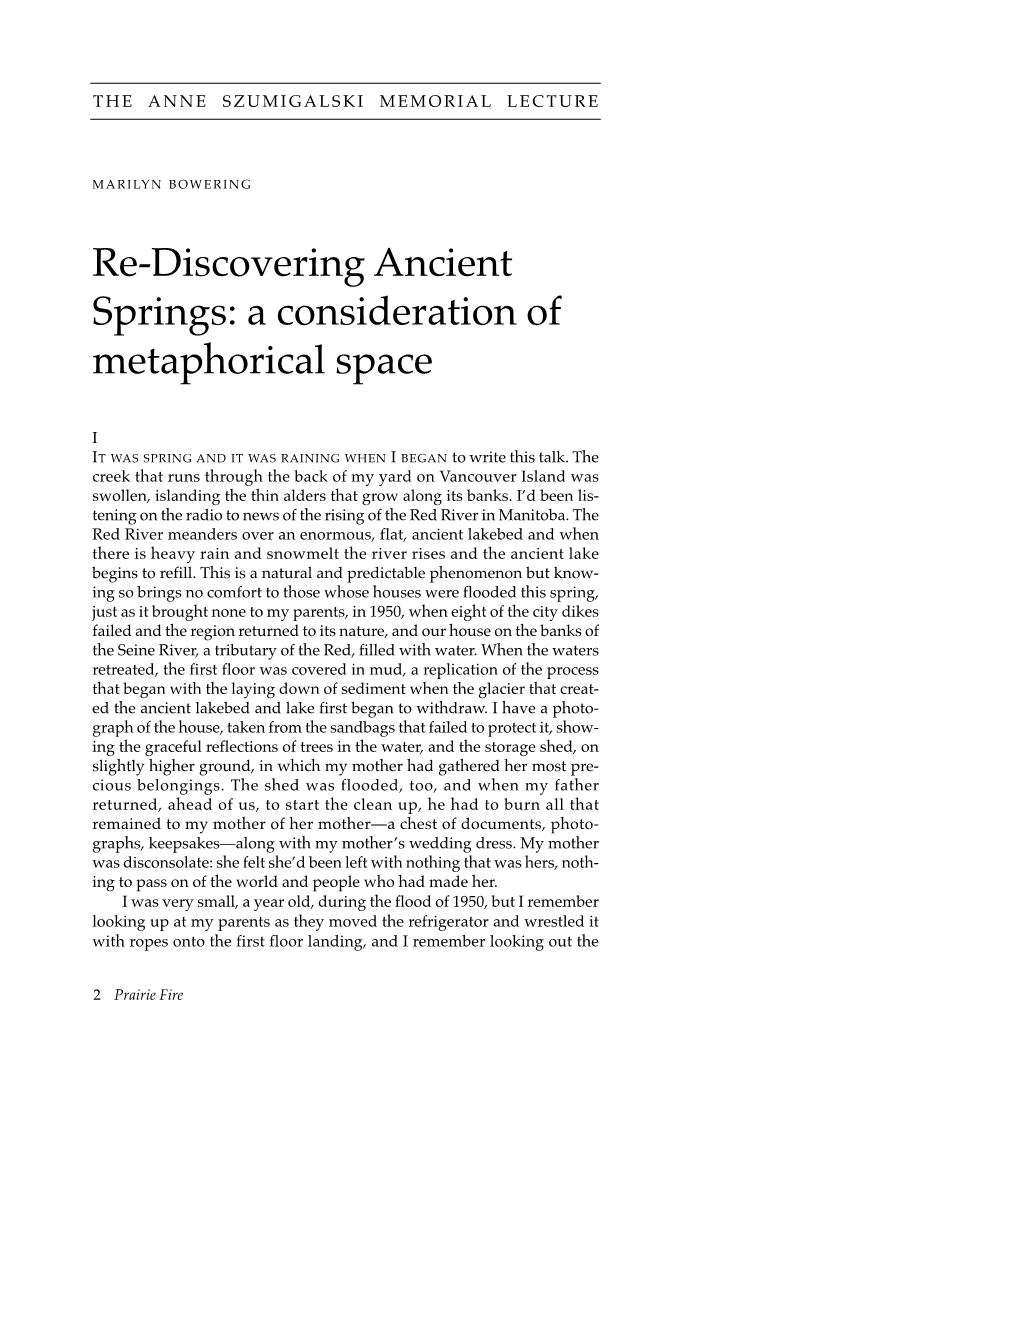 Re-Discovering Ancient Springs: a Consideration of Metaphorical Space